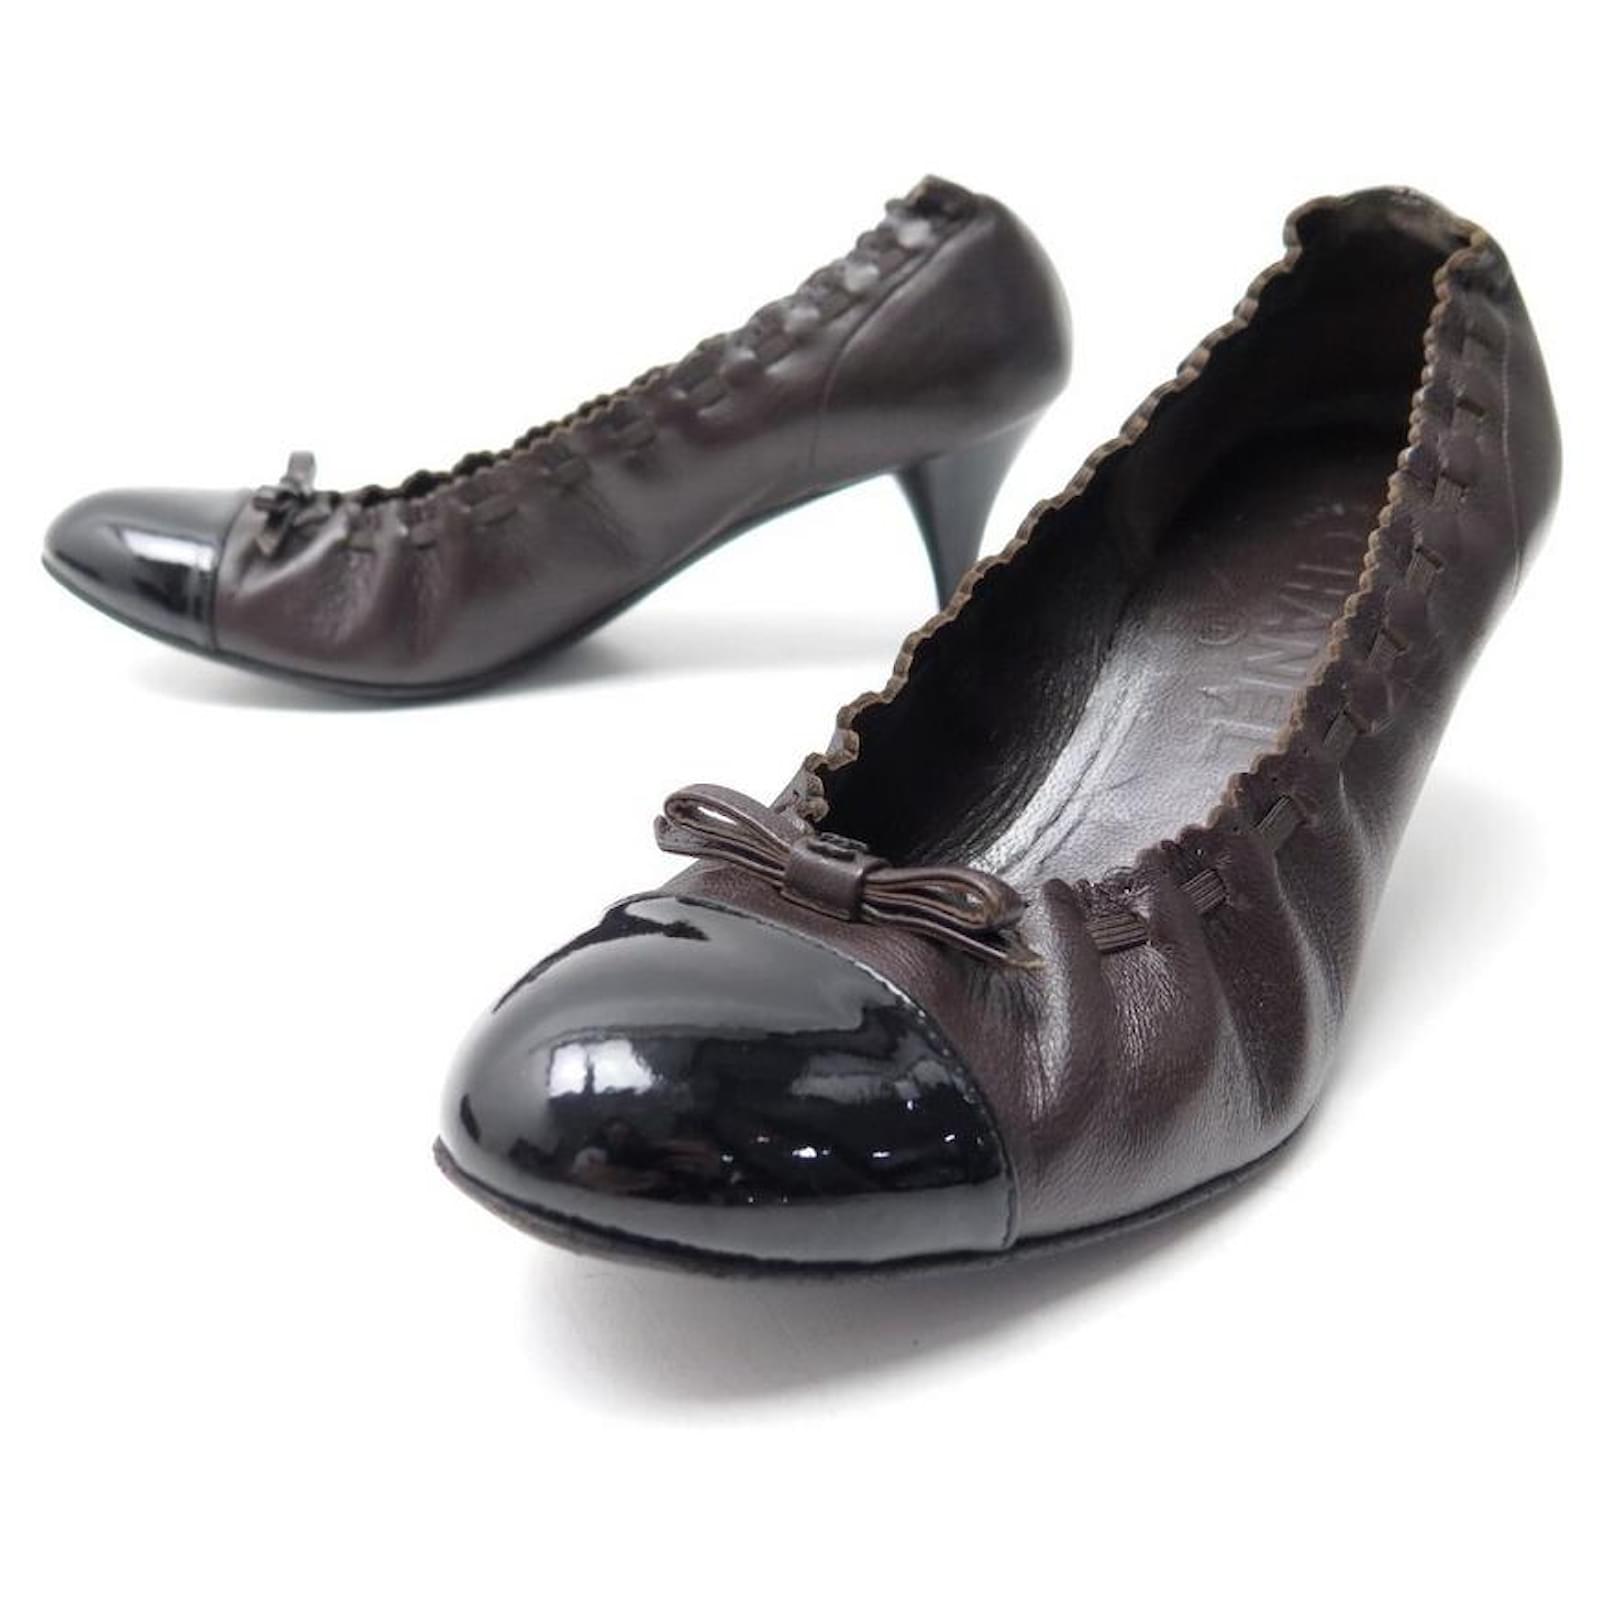 CHANEL SHOES PUMPS 36.5 IN PLUM LEATHER + BOX LEATHER SHOES Prune